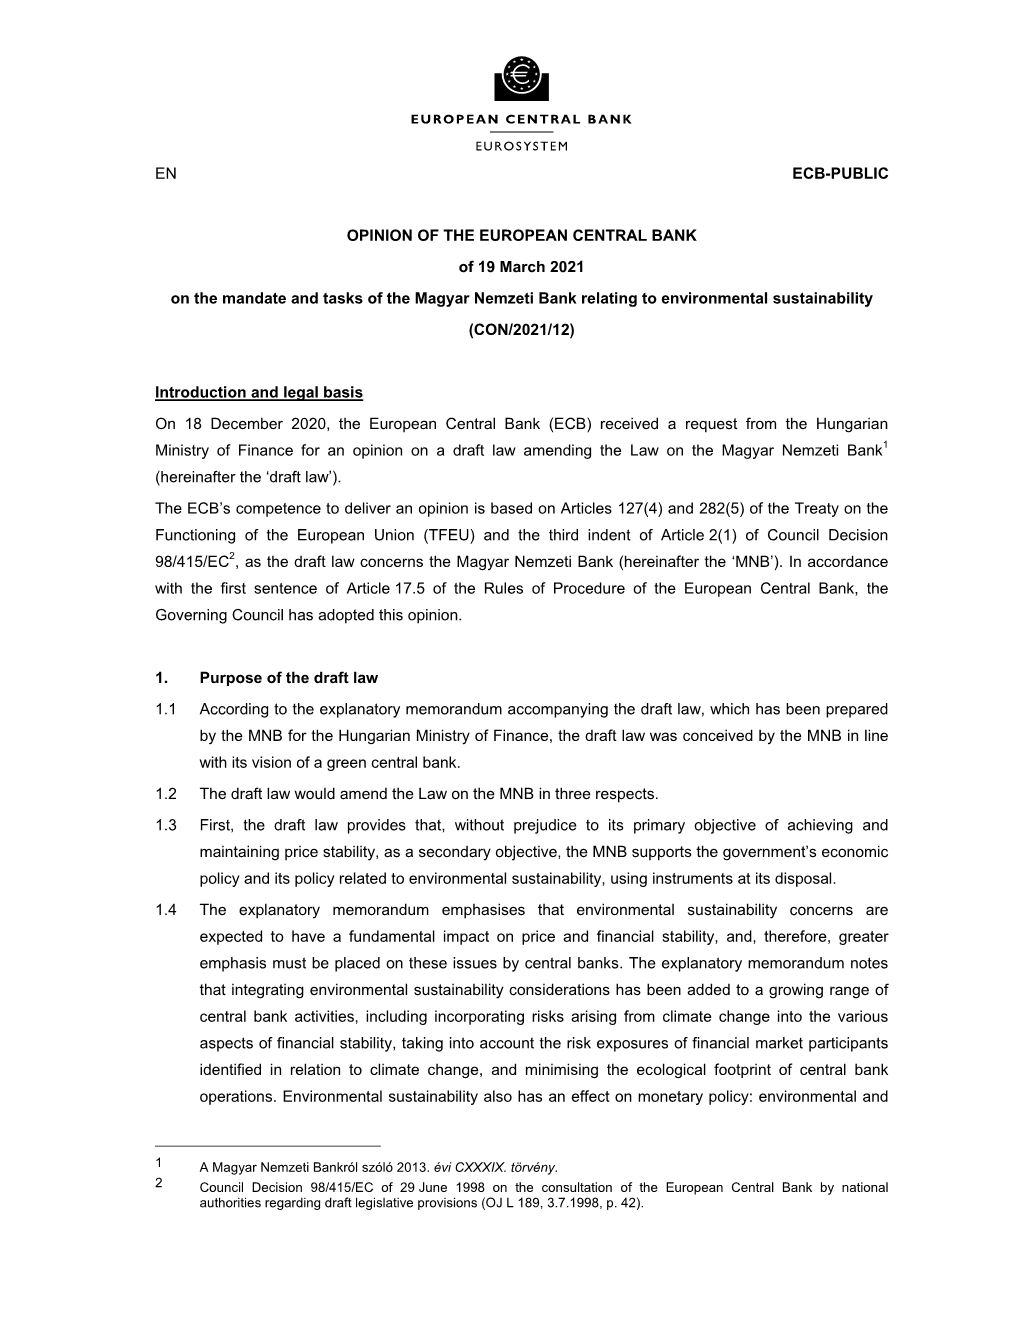 OPINION of the EUROPEAN CENTRAL BANK of 19 March 2021 on the Mandate and Tasks of the Magyar Nemzeti Bank Relating to Environmental Sustainability (CON/2021/12)